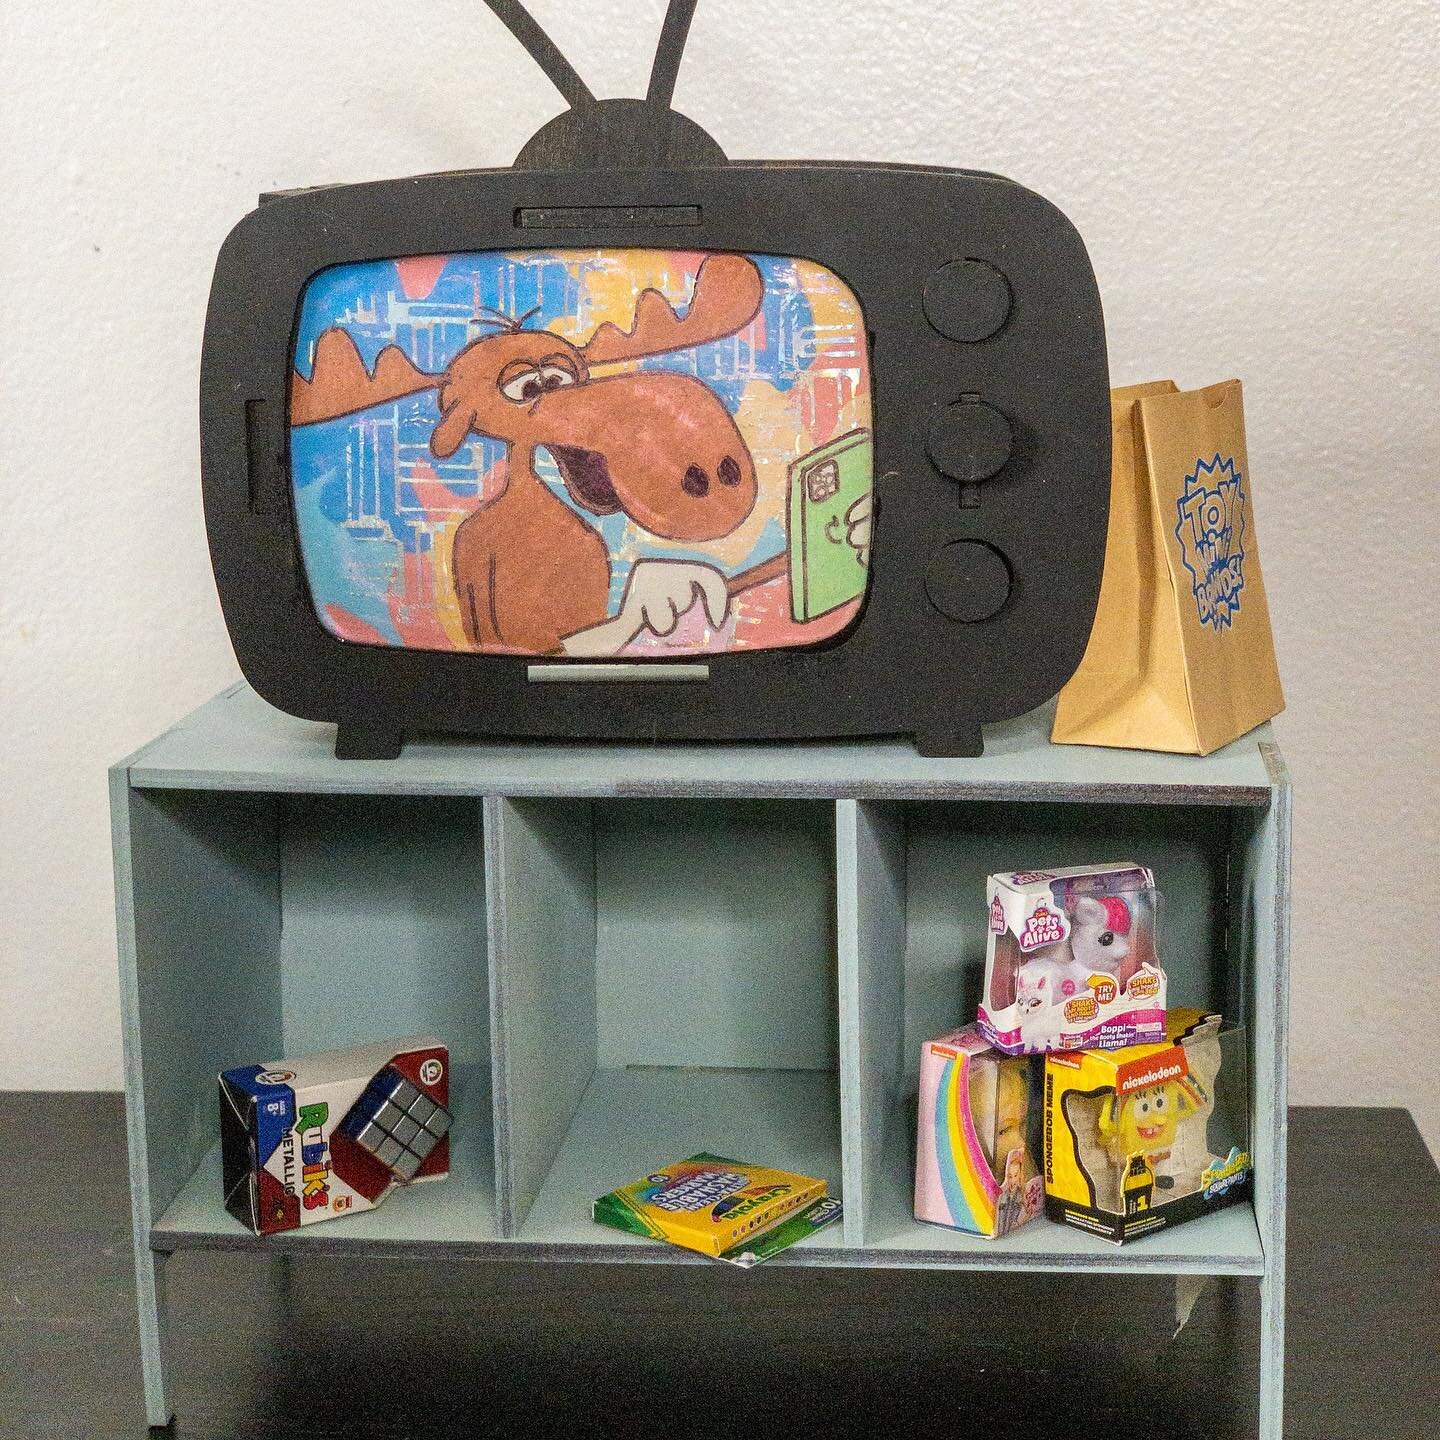 Tv stand is up on the website for people who missed the memo!

Should I put the vintage tv up for sale though 🤔 you have to add your own old school cartoons though. 

#dollfurniture #bjddiorama #bjd #dollprops